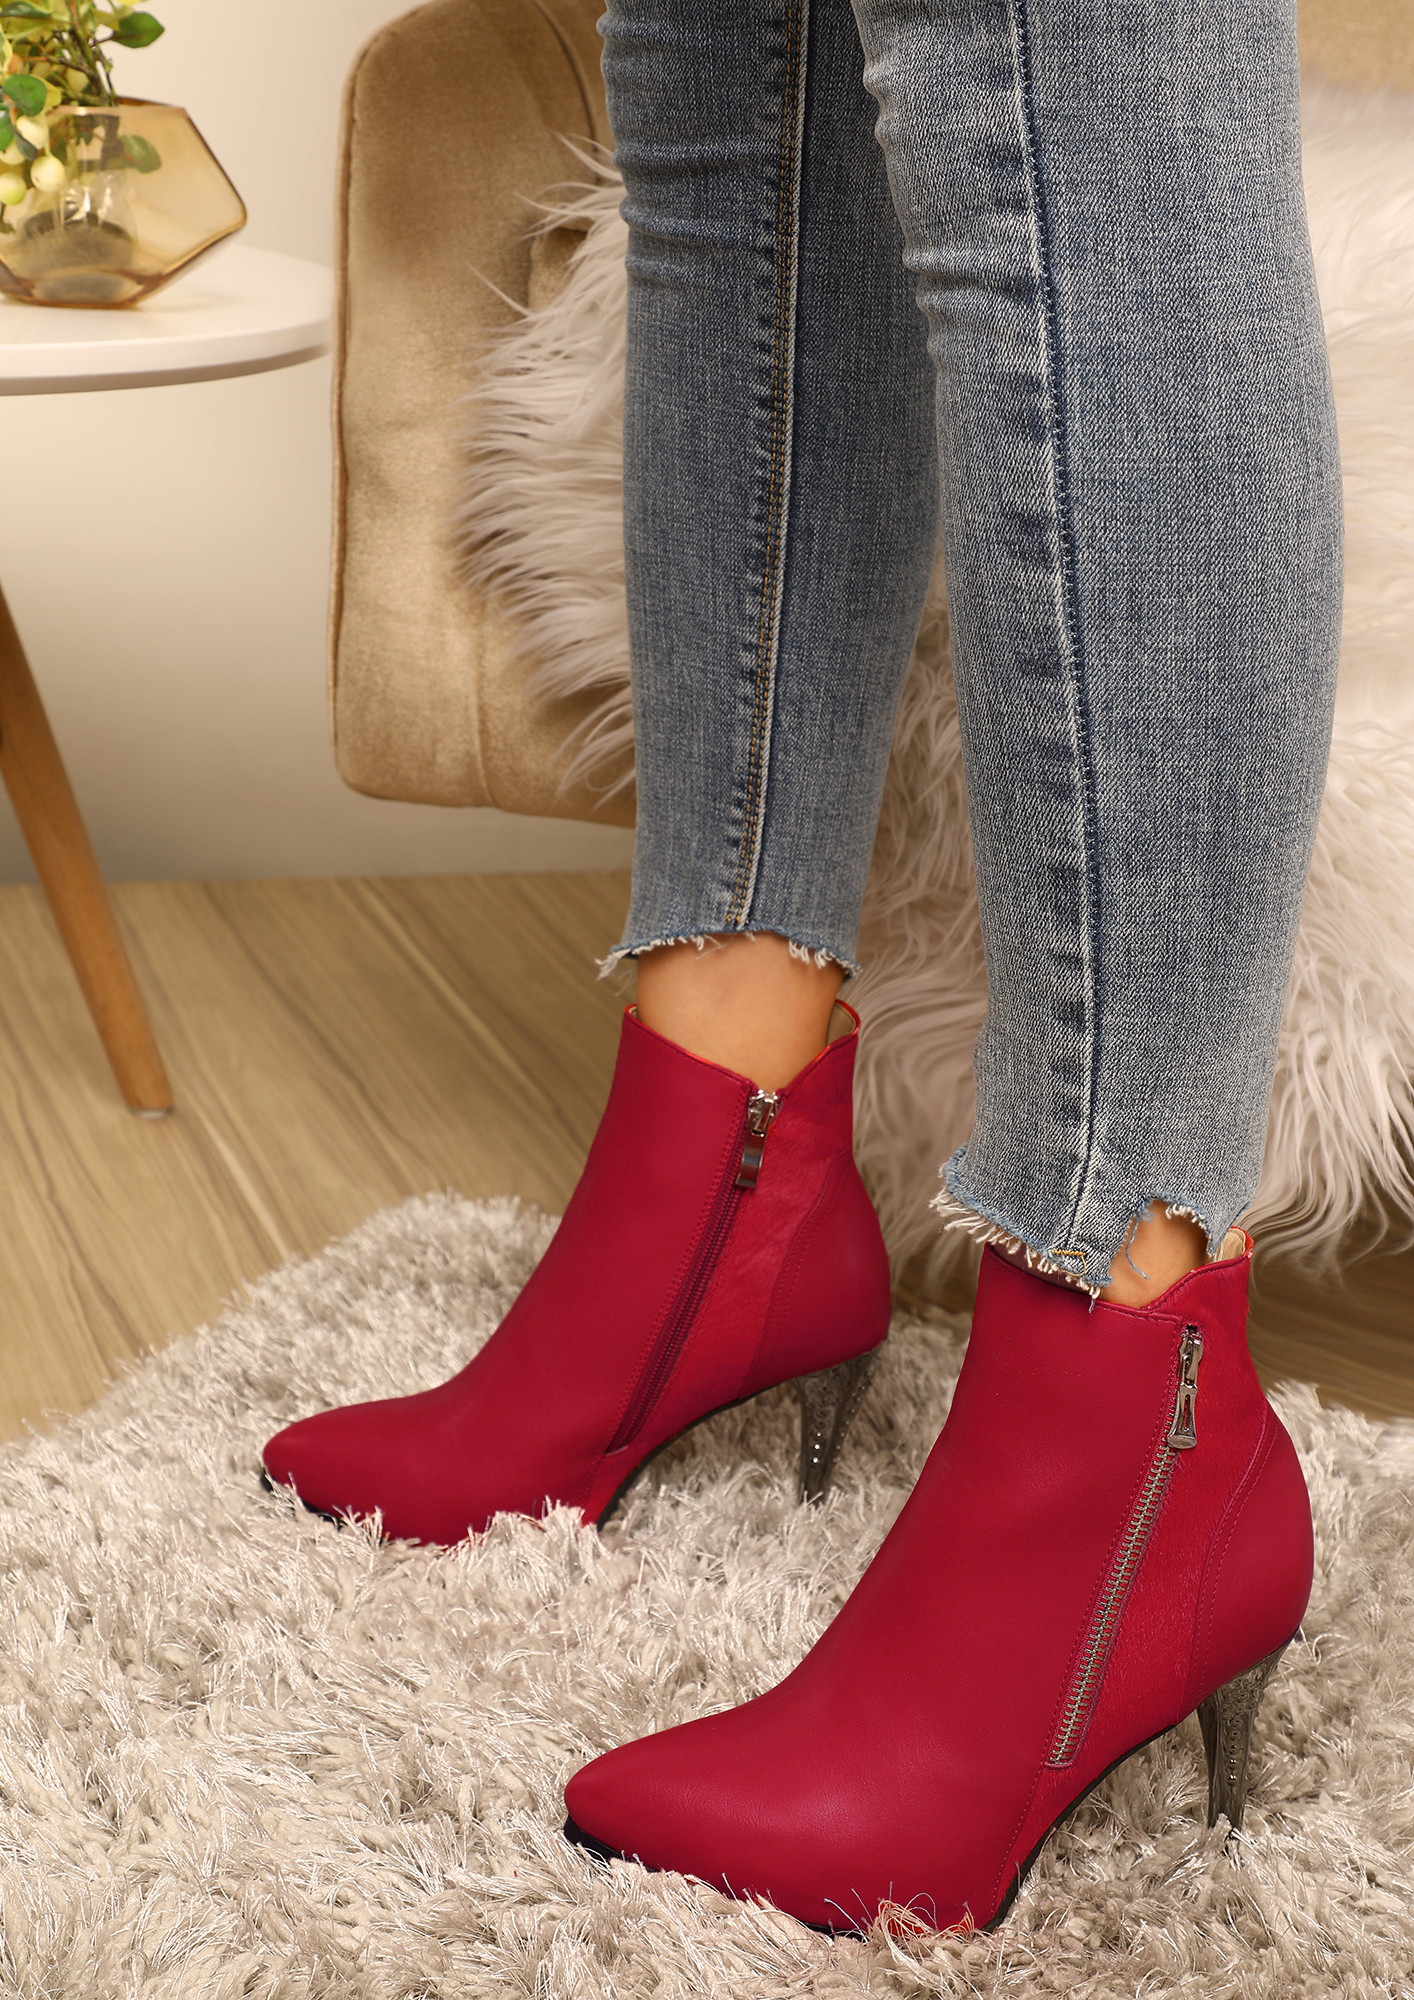 Only Maker Rose Red Platform Chunky High Heels Ankle Boots | Atomic Jane  Clothing